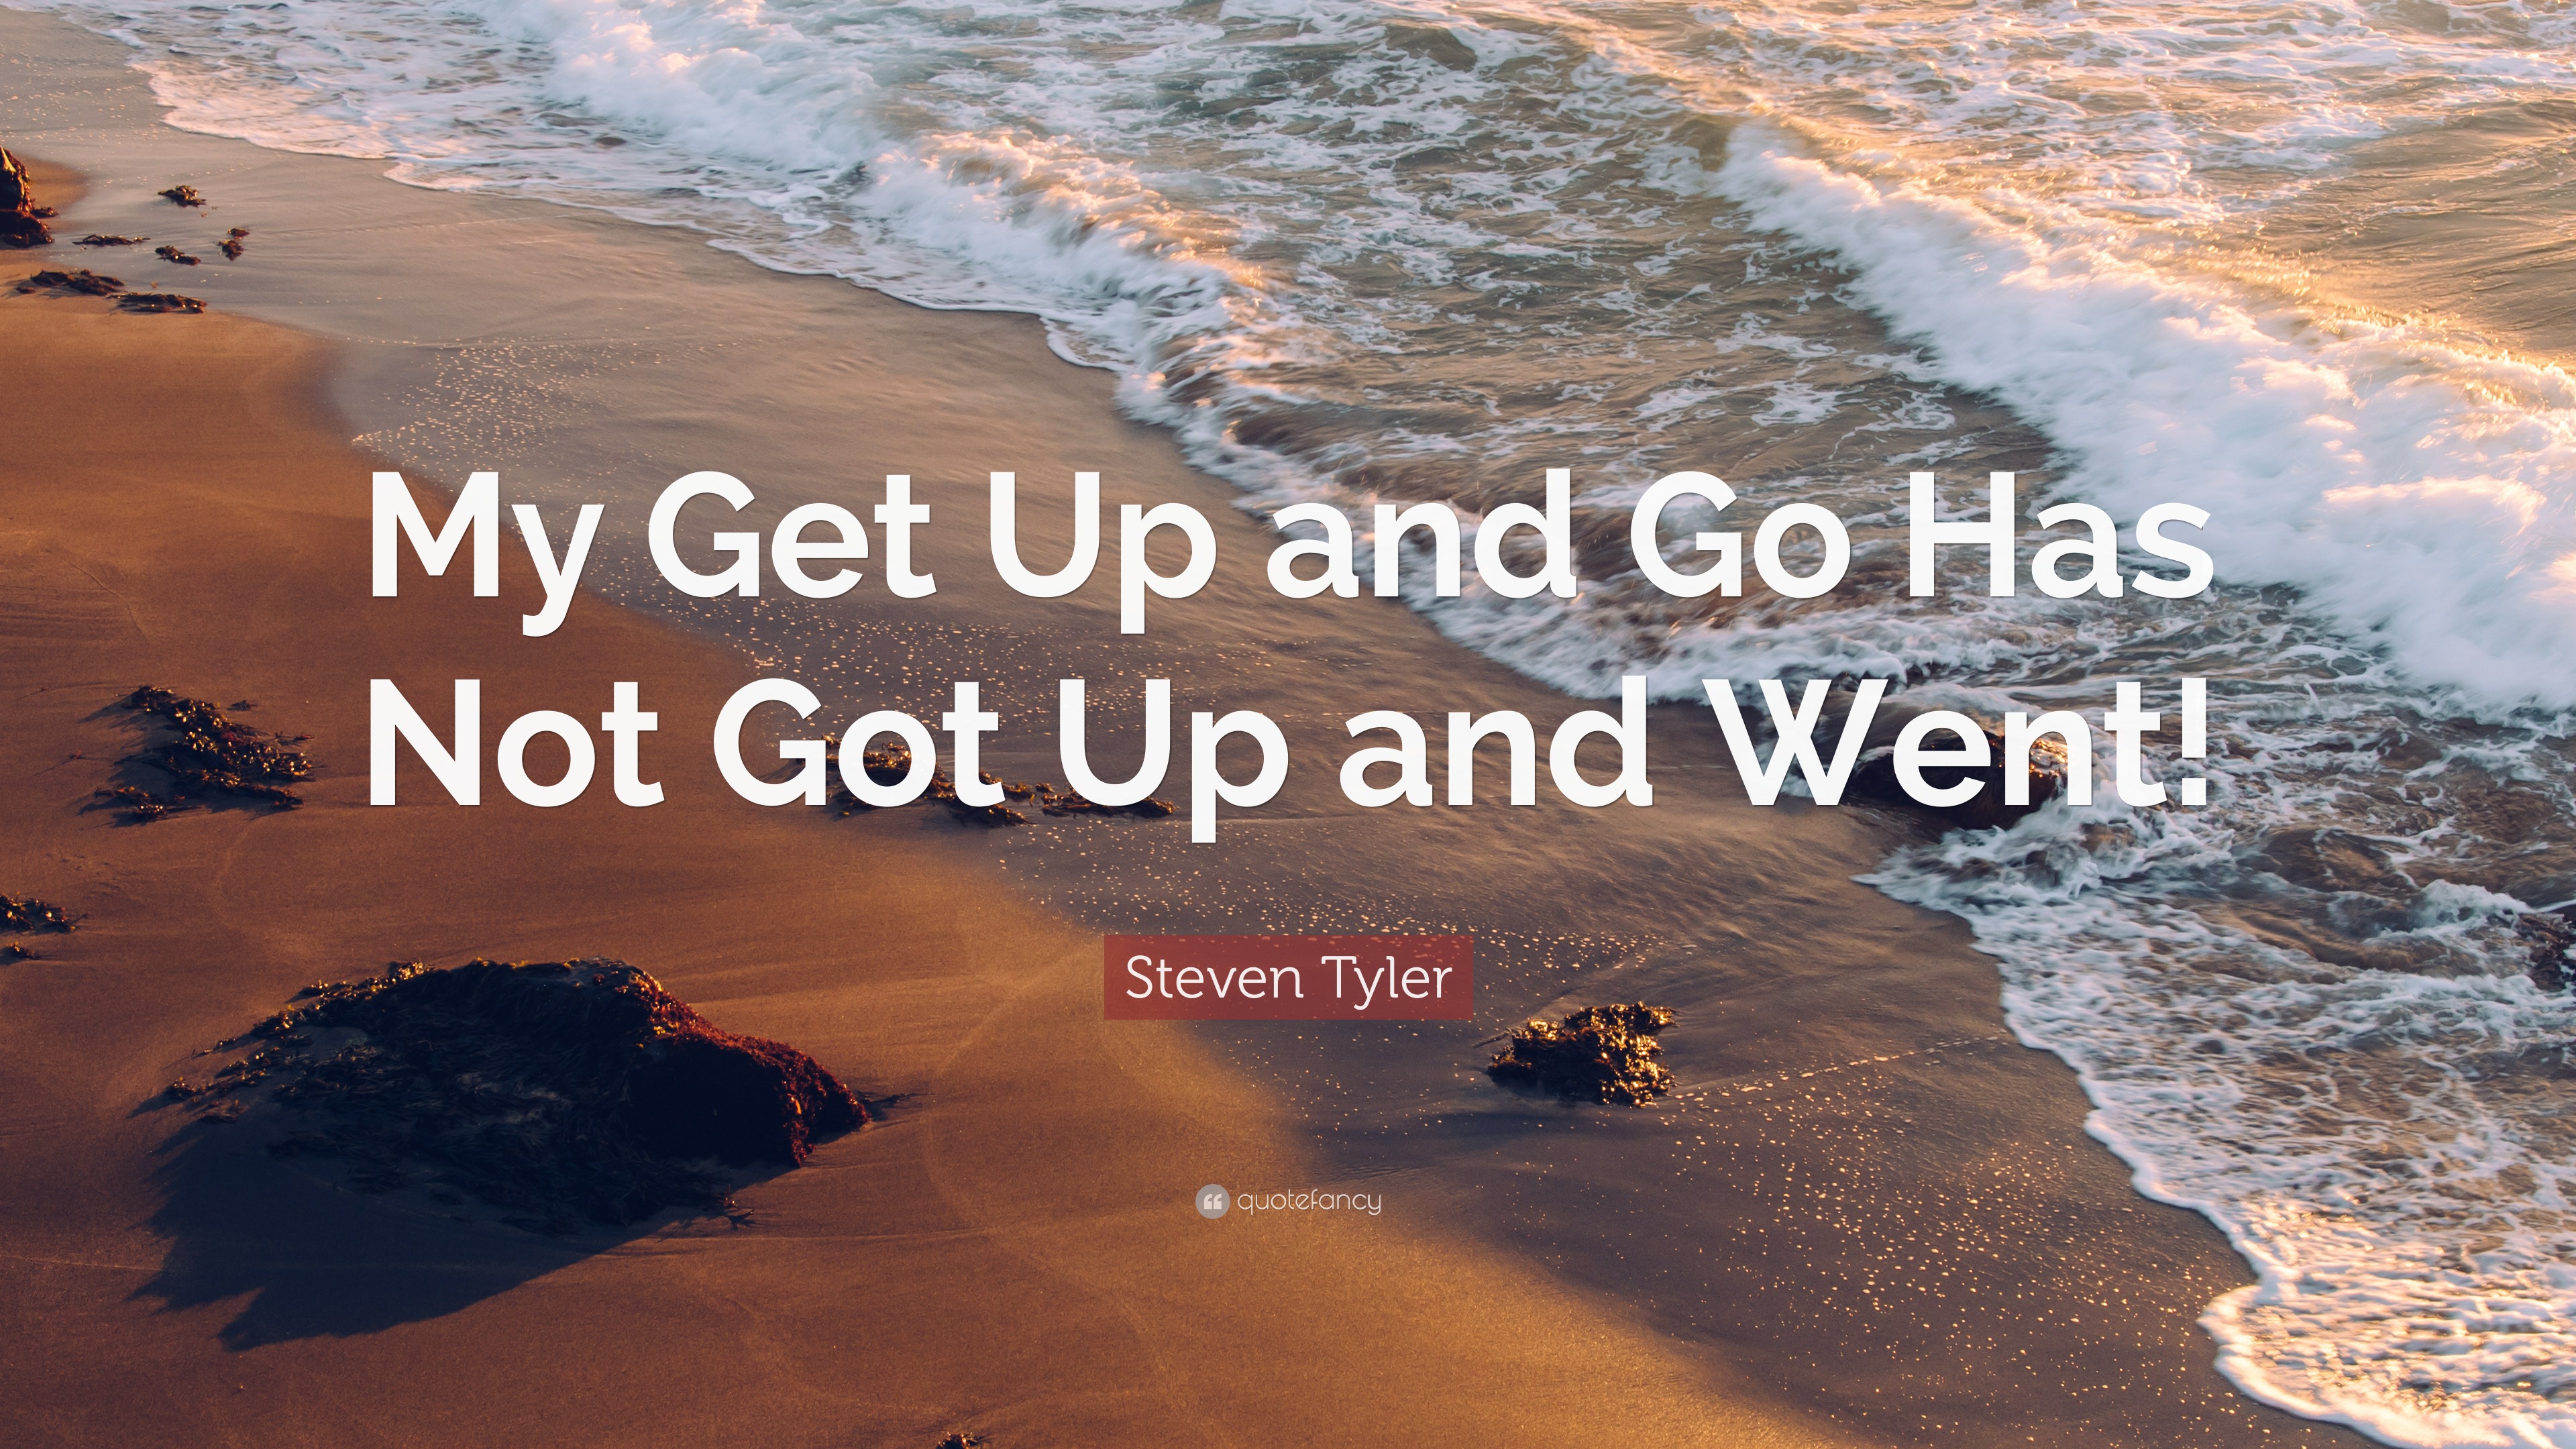 Steven Tyler Quote: “My Get Up and Go Has Not Got Up and Went!”